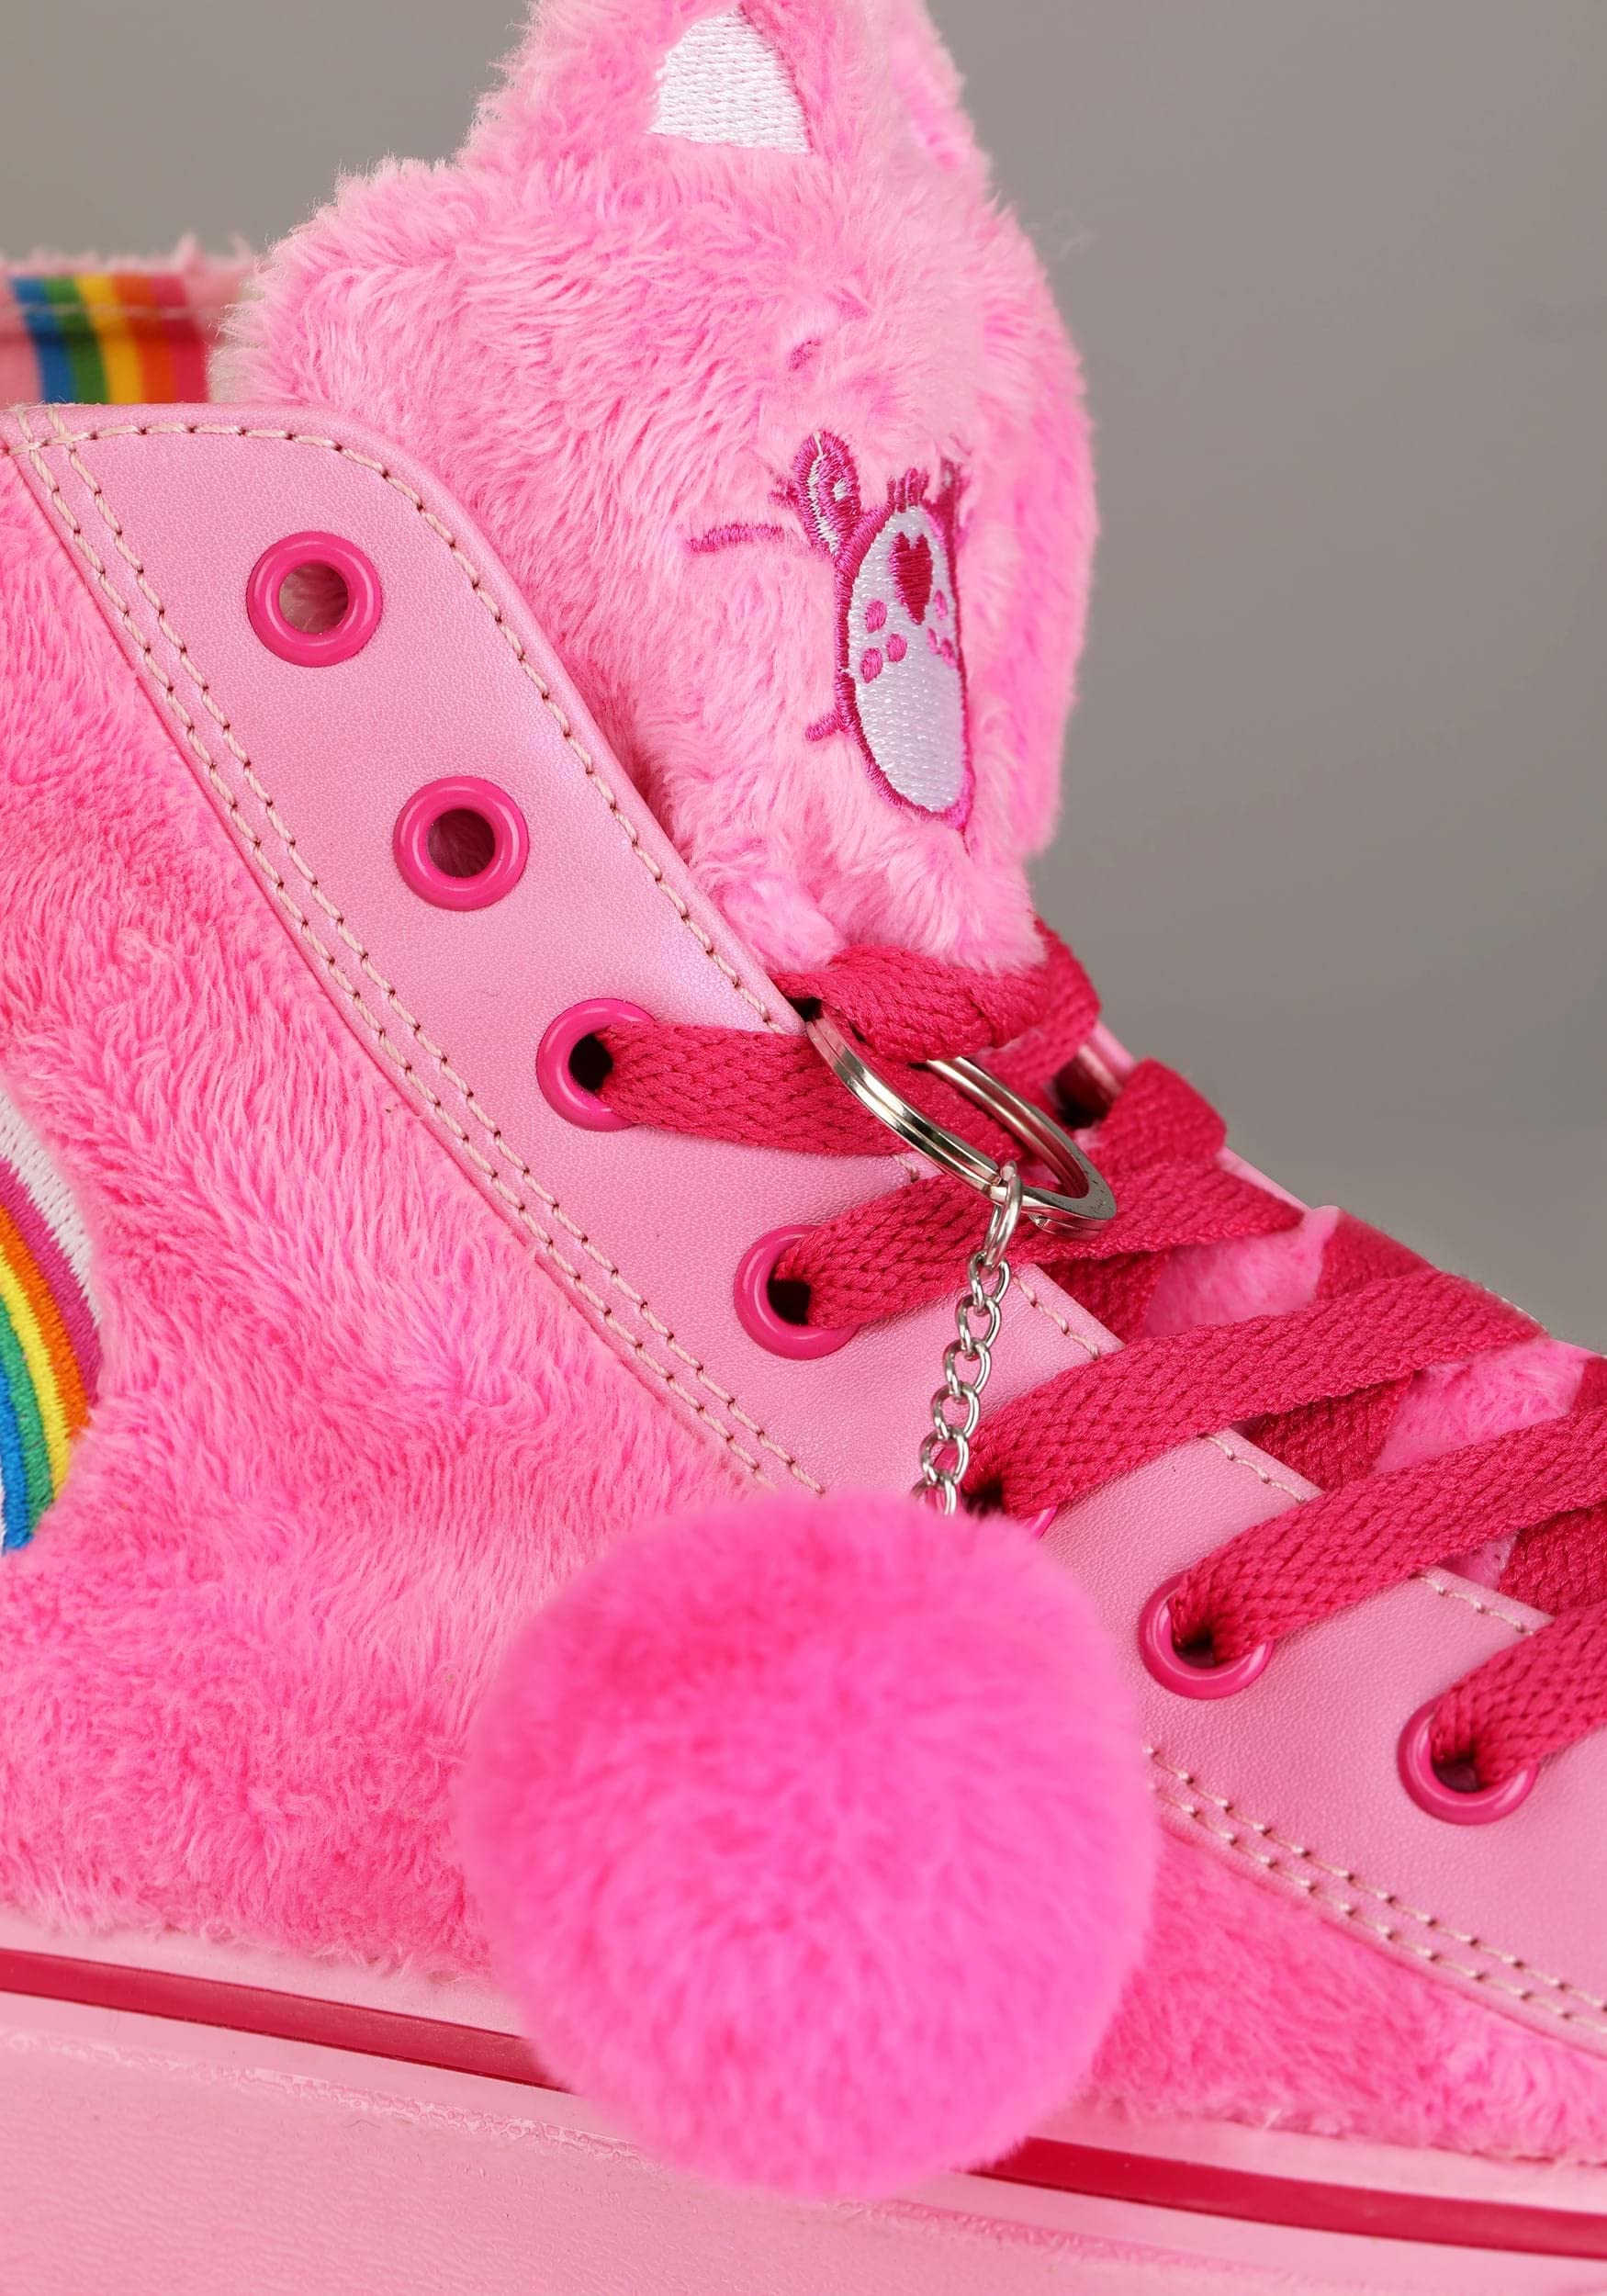 Care Bears Adult Pink Cheer Bear Shoes with Faux Fur and Embroidered Details (US Footwear Size System, Adult, Women, Numeric, Medium, 5)